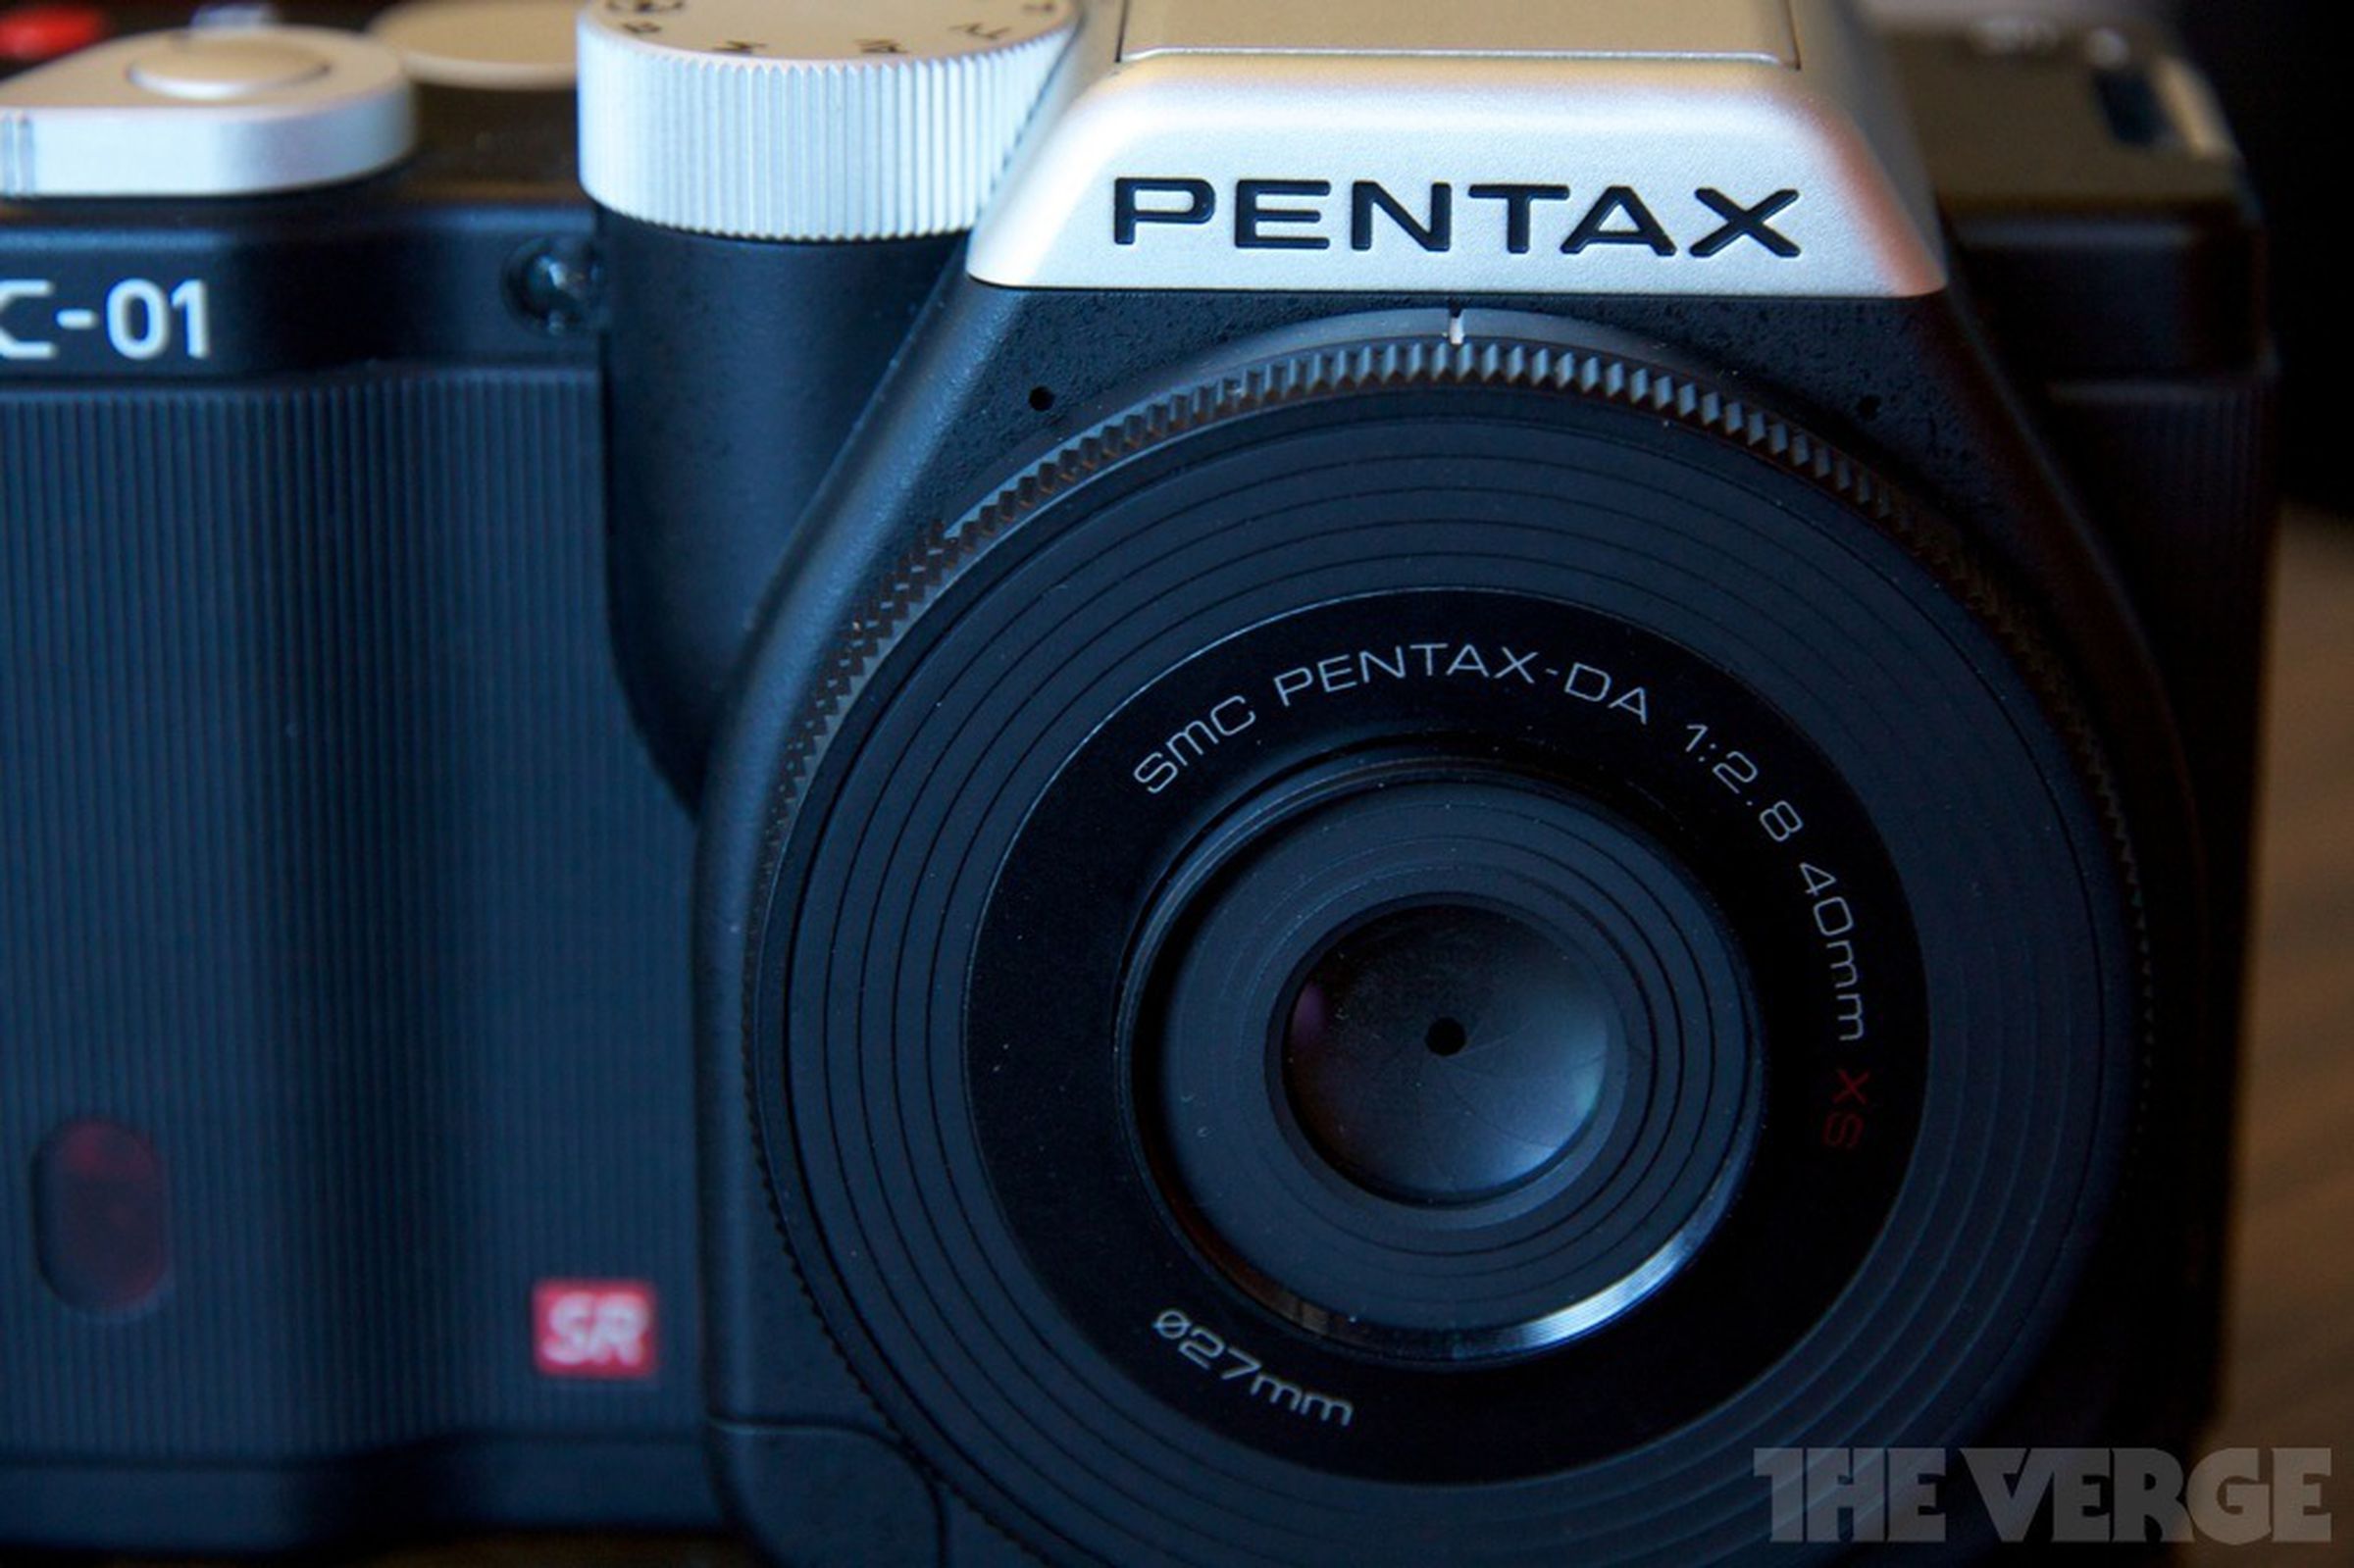 Pentax K-01 review pictures